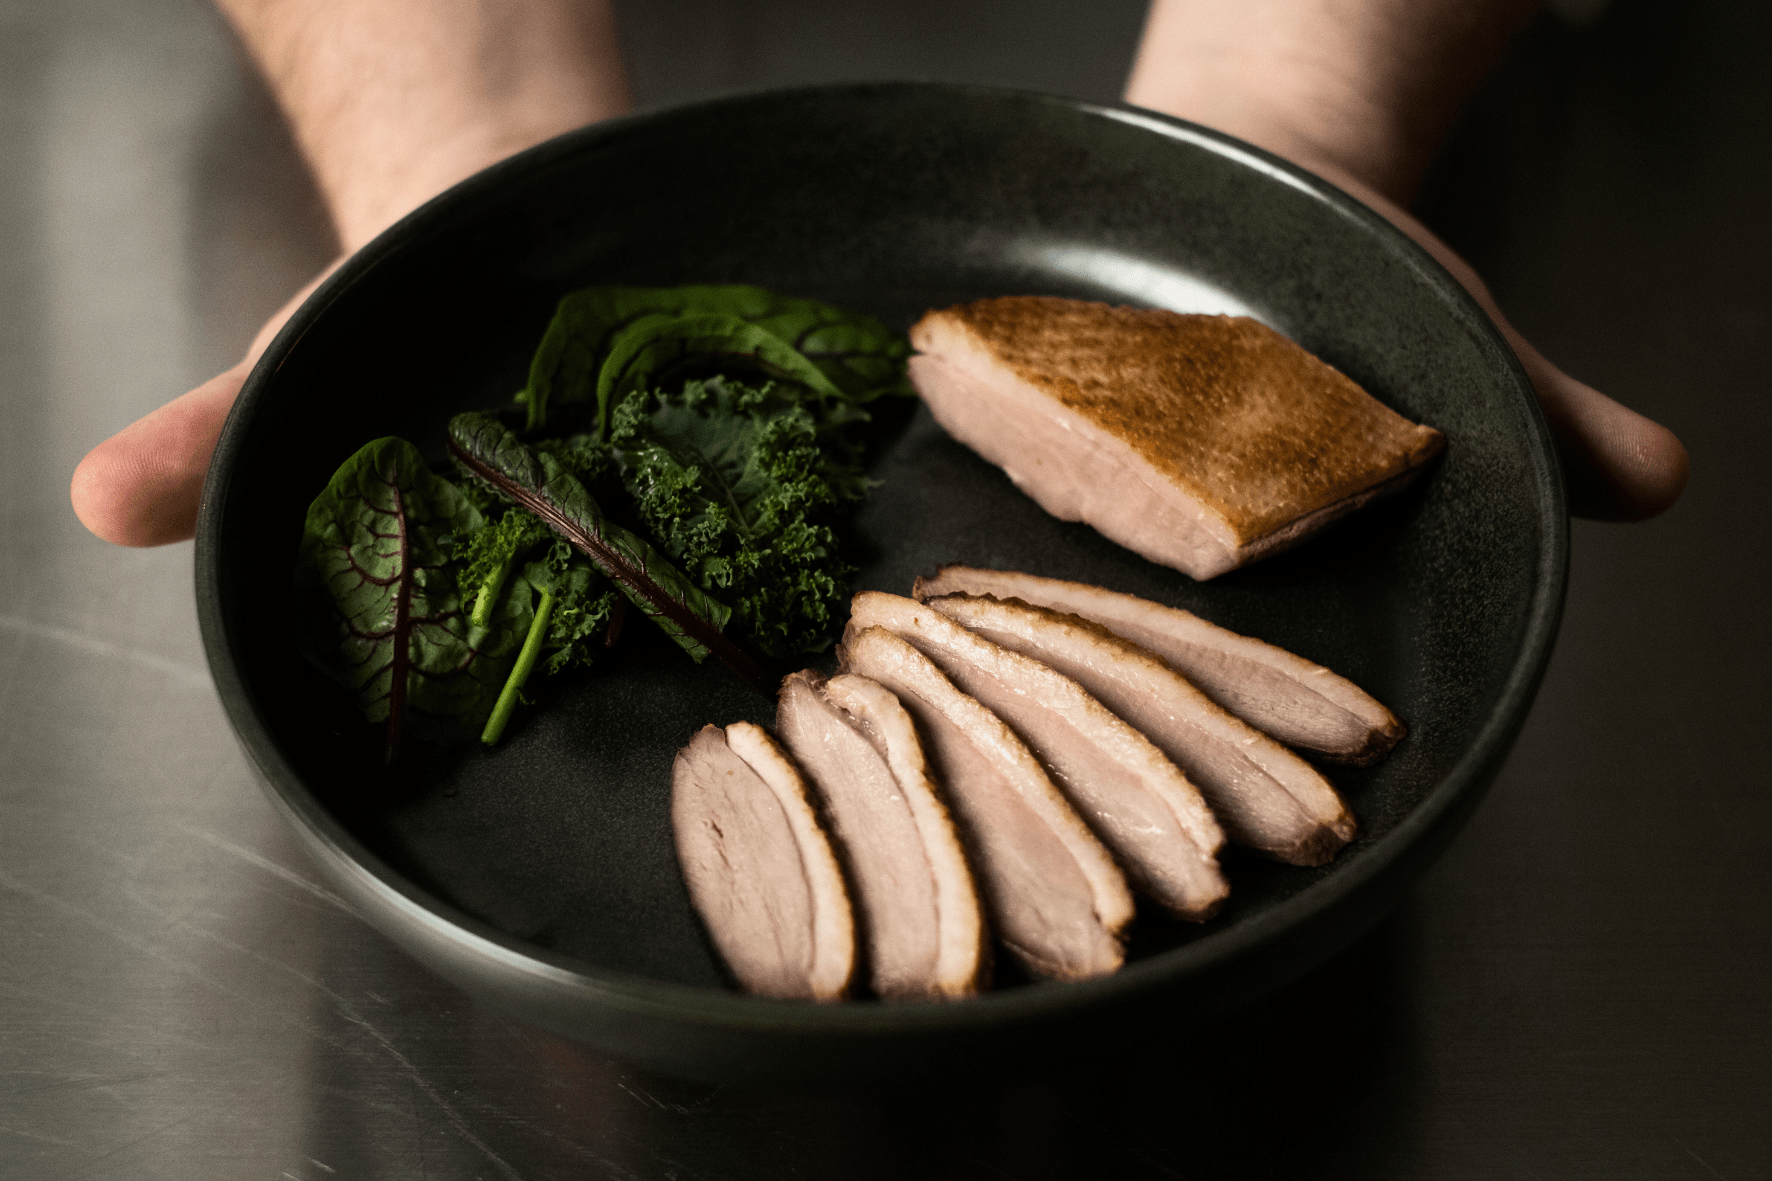 Introducing the Culinary Delights of Klong Phai Farm's Artisan Smoked Products